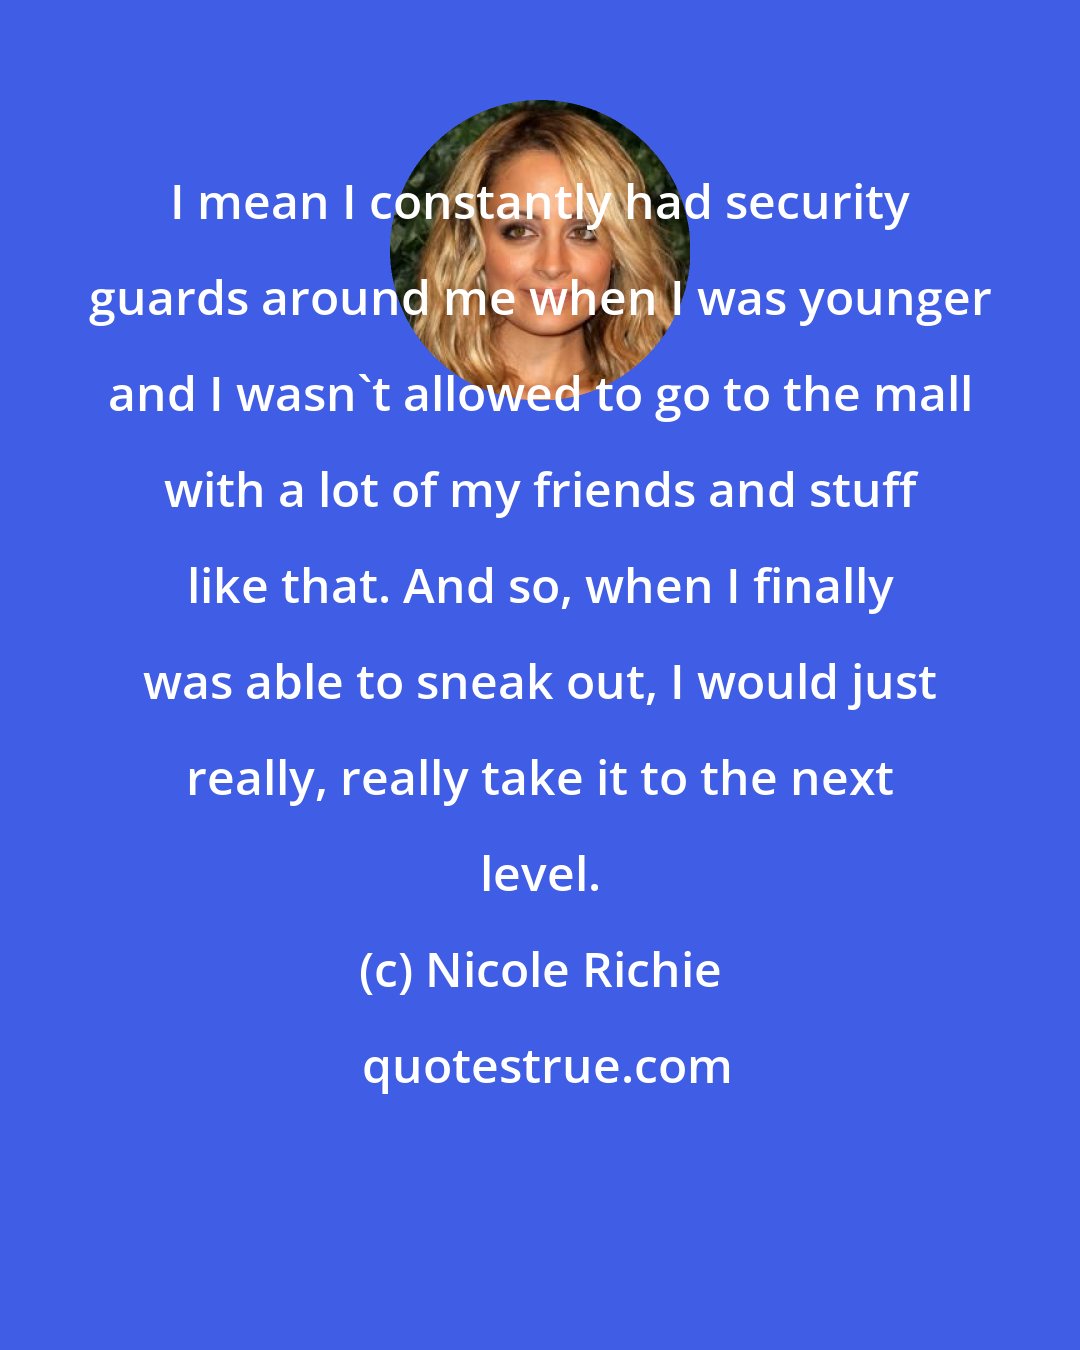 Nicole Richie: I mean I constantly had security guards around me when I was younger and I wasn't allowed to go to the mall with a lot of my friends and stuff like that. And so, when I finally was able to sneak out, I would just really, really take it to the next level.